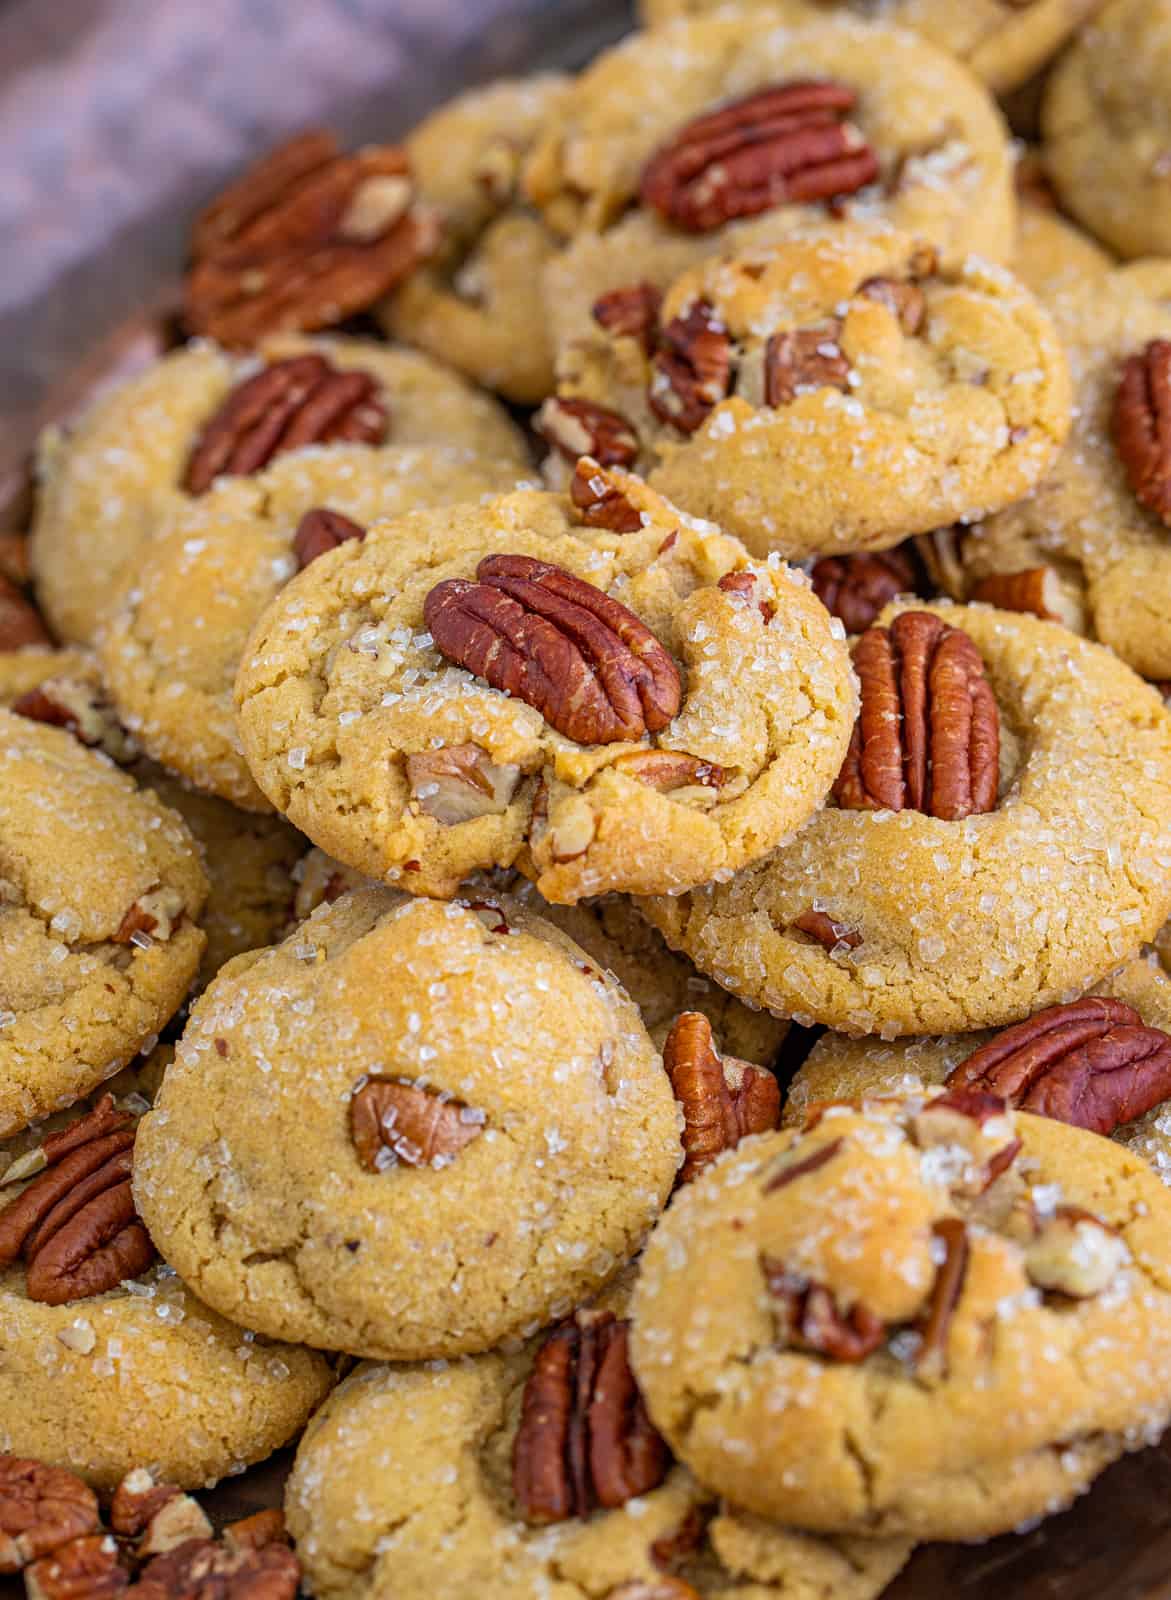 Stacked Butter Pecan Cookies on hammered metal tray.